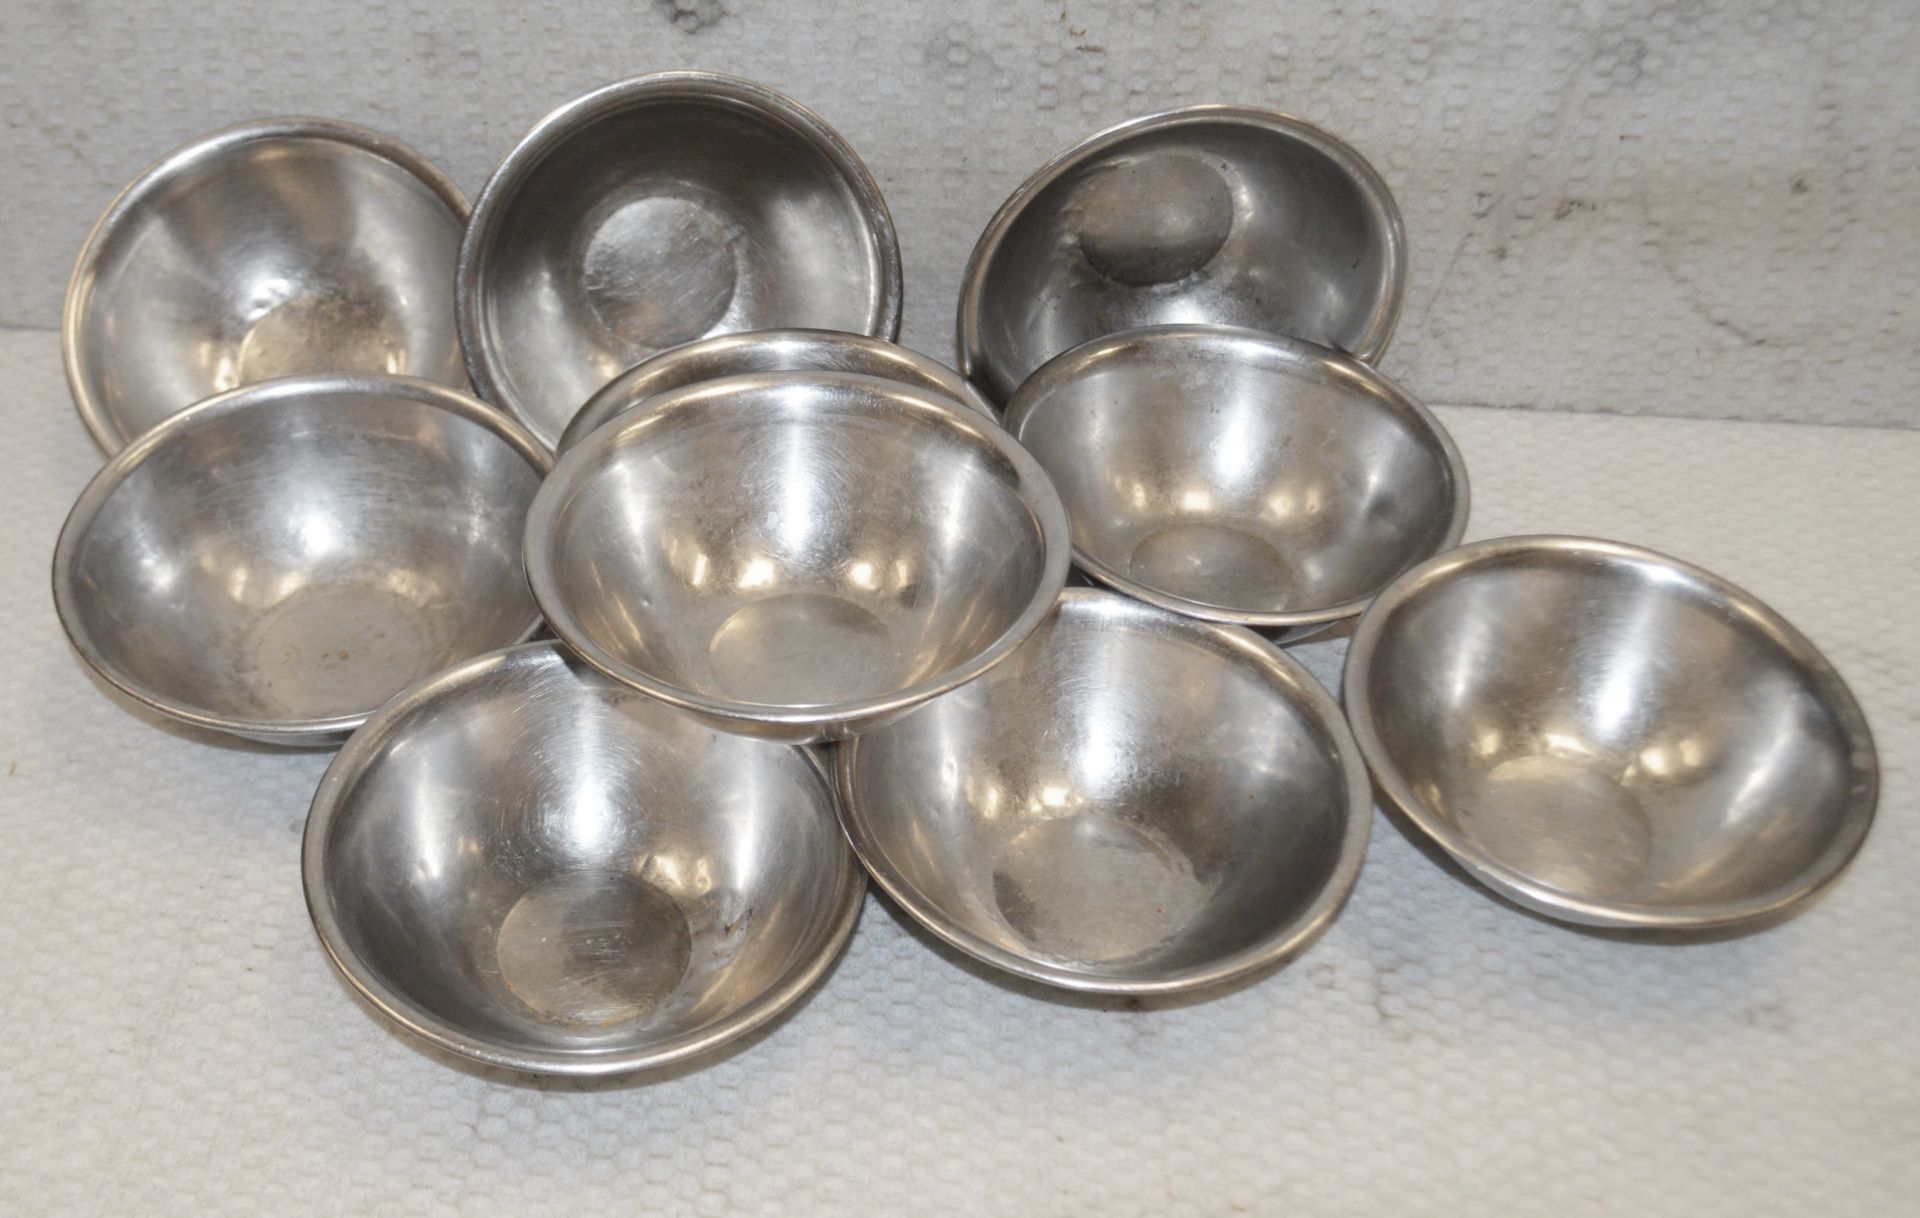 19 x Stainless Steel Mixing  Bowls For Commercial Kitchens - Includes Small, Medium and Large - Image 3 of 6